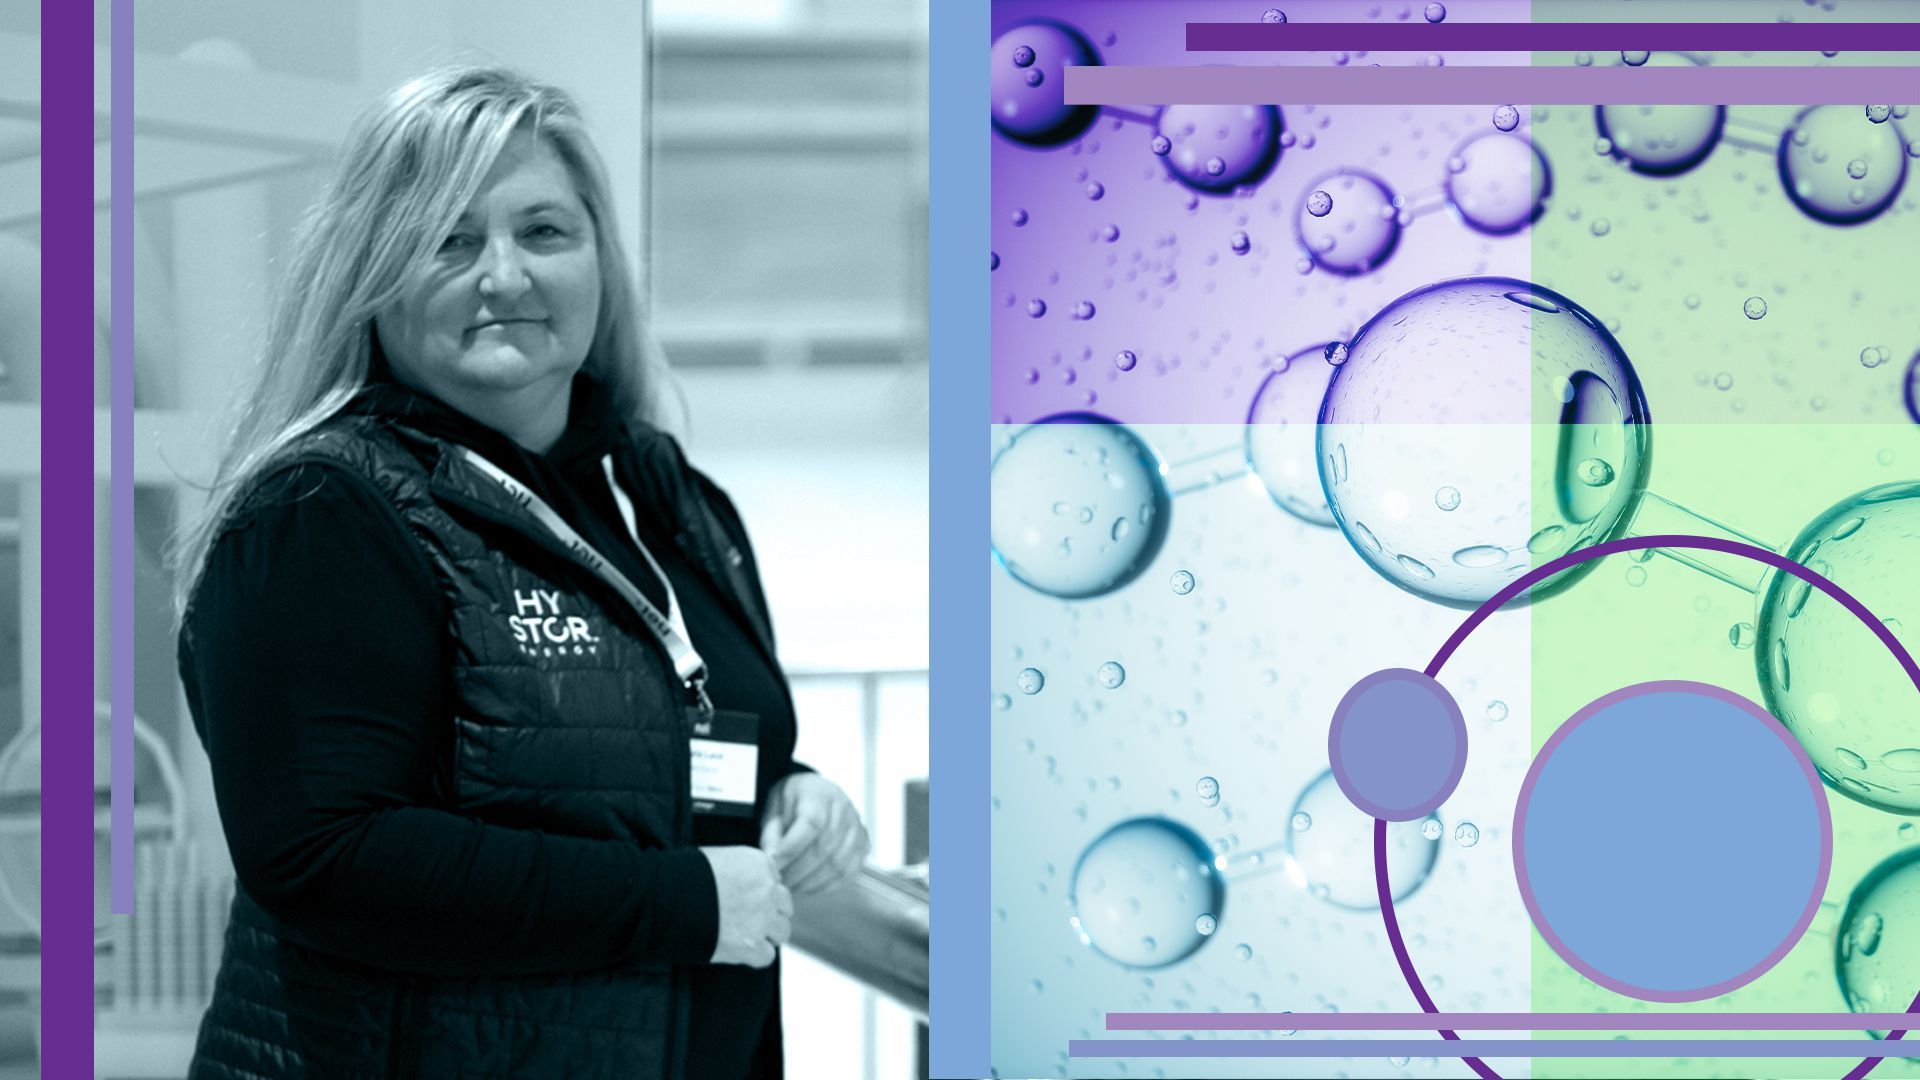 Photo illustration of Laura Luce, hydrogen molecules, and abstract shapes.